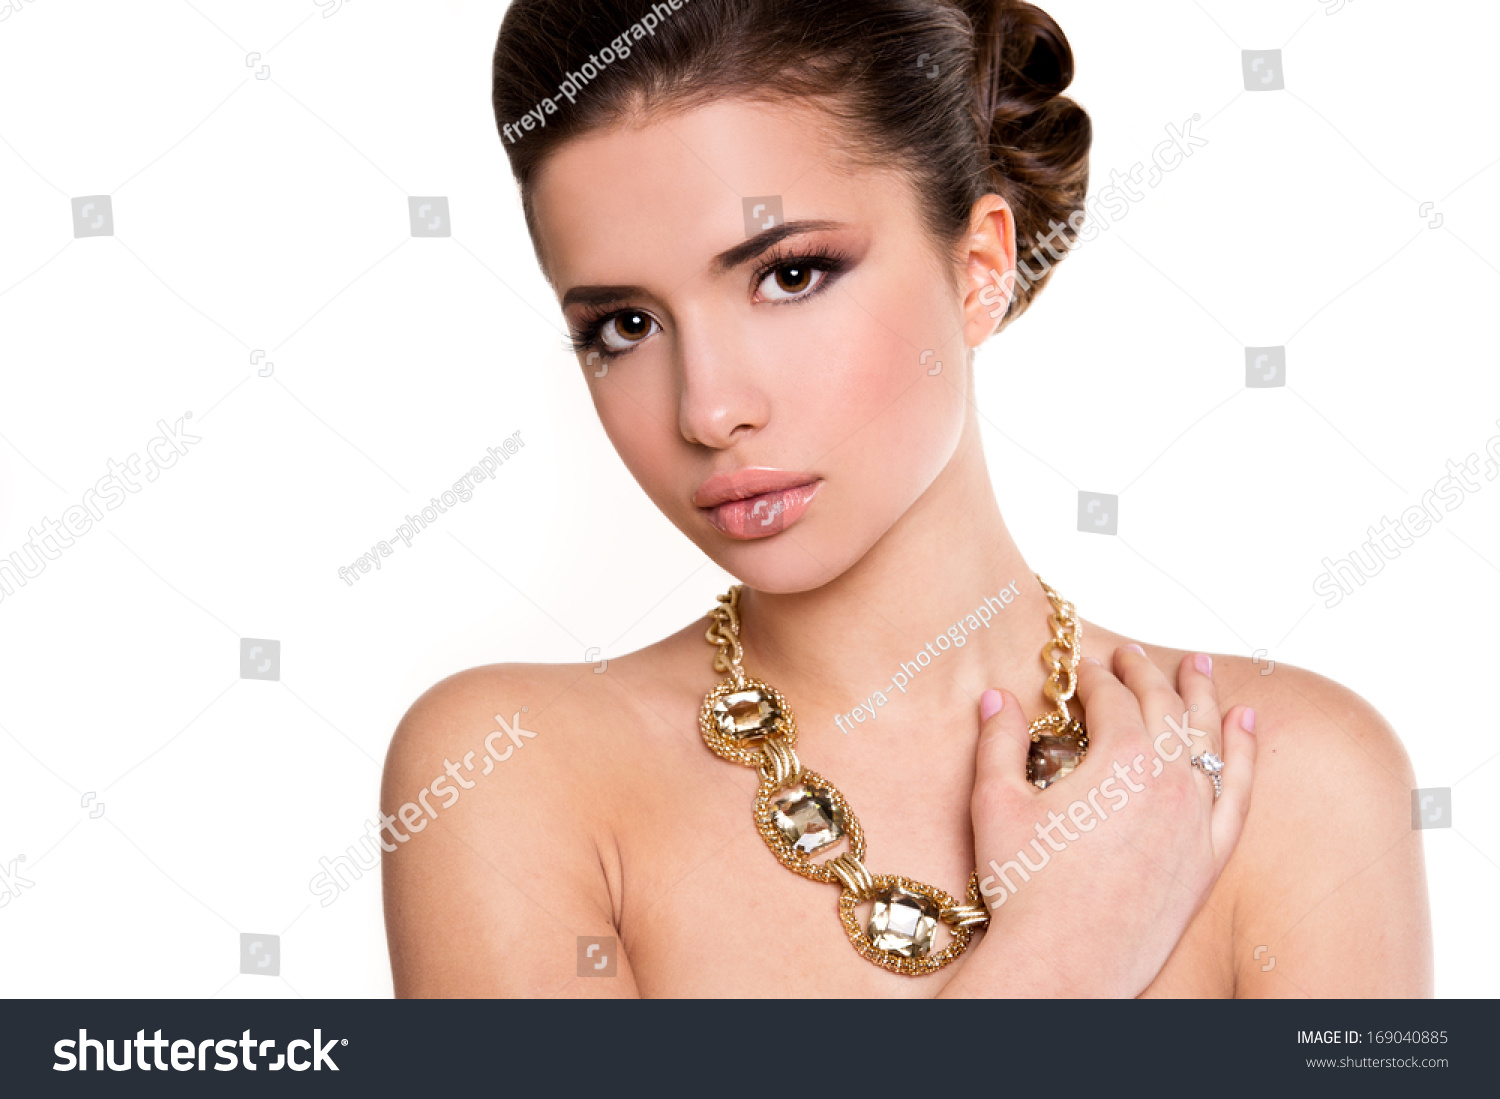  young beautiful woman with trendy make-up and hairstyle  #169040885